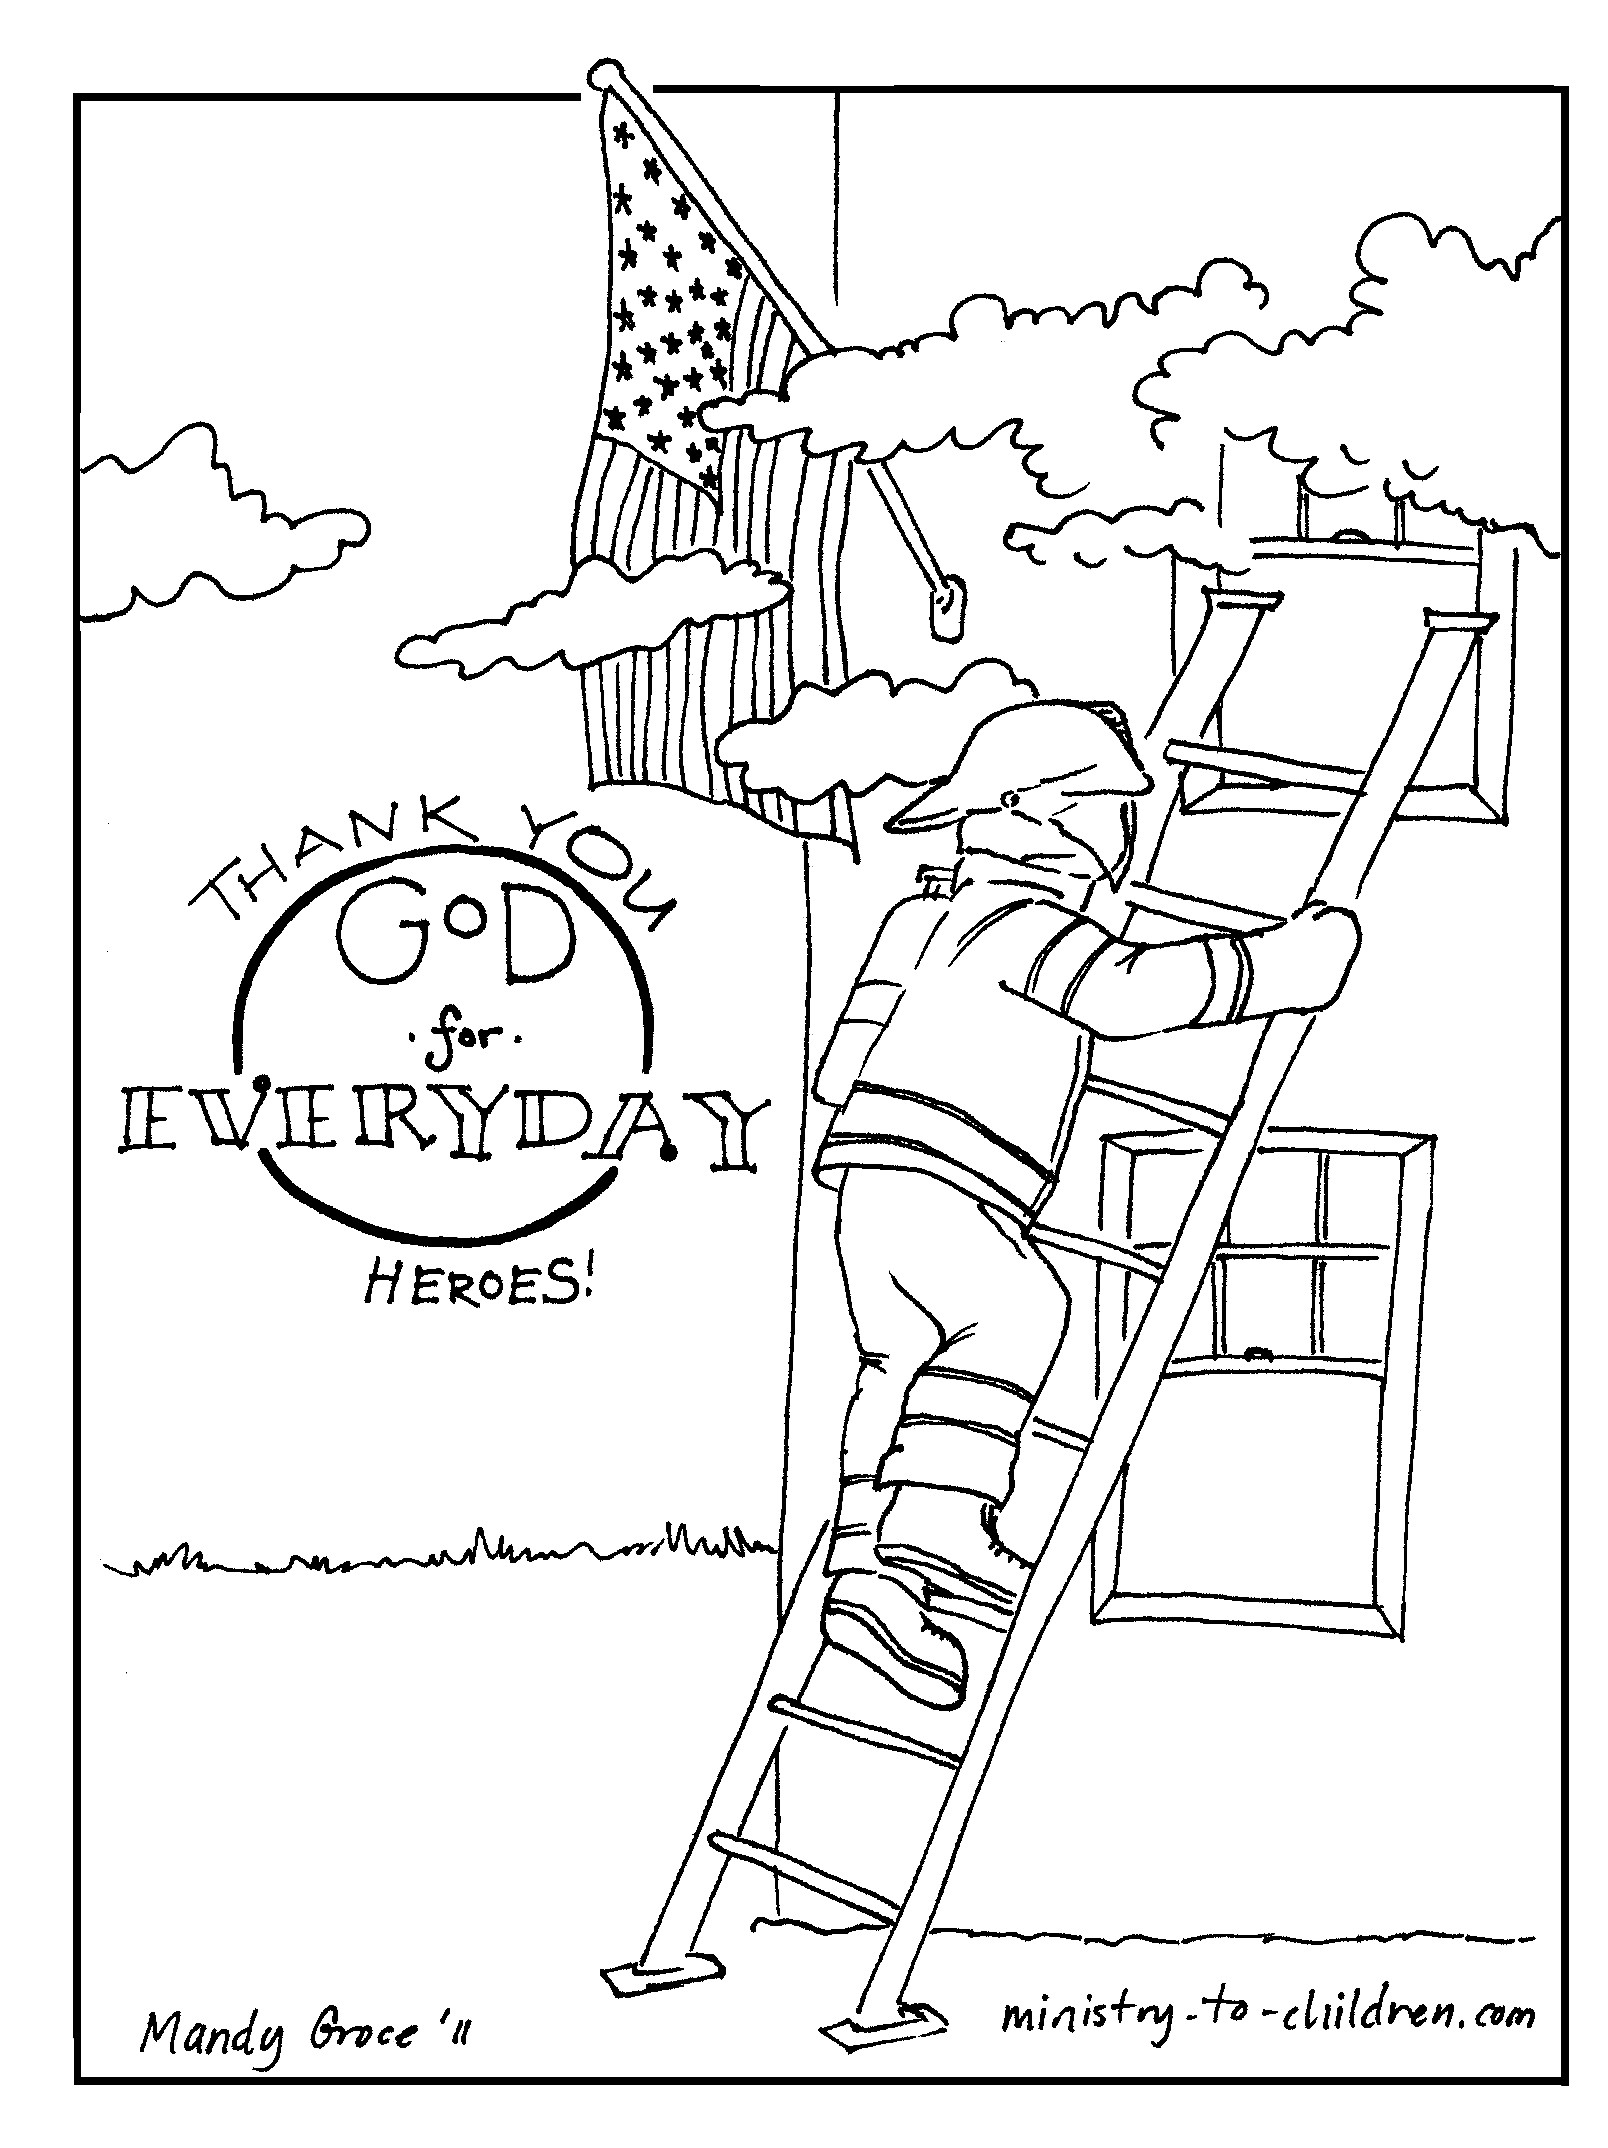 Rules Coloring Pages at GetColorings.com | Free printable colorings